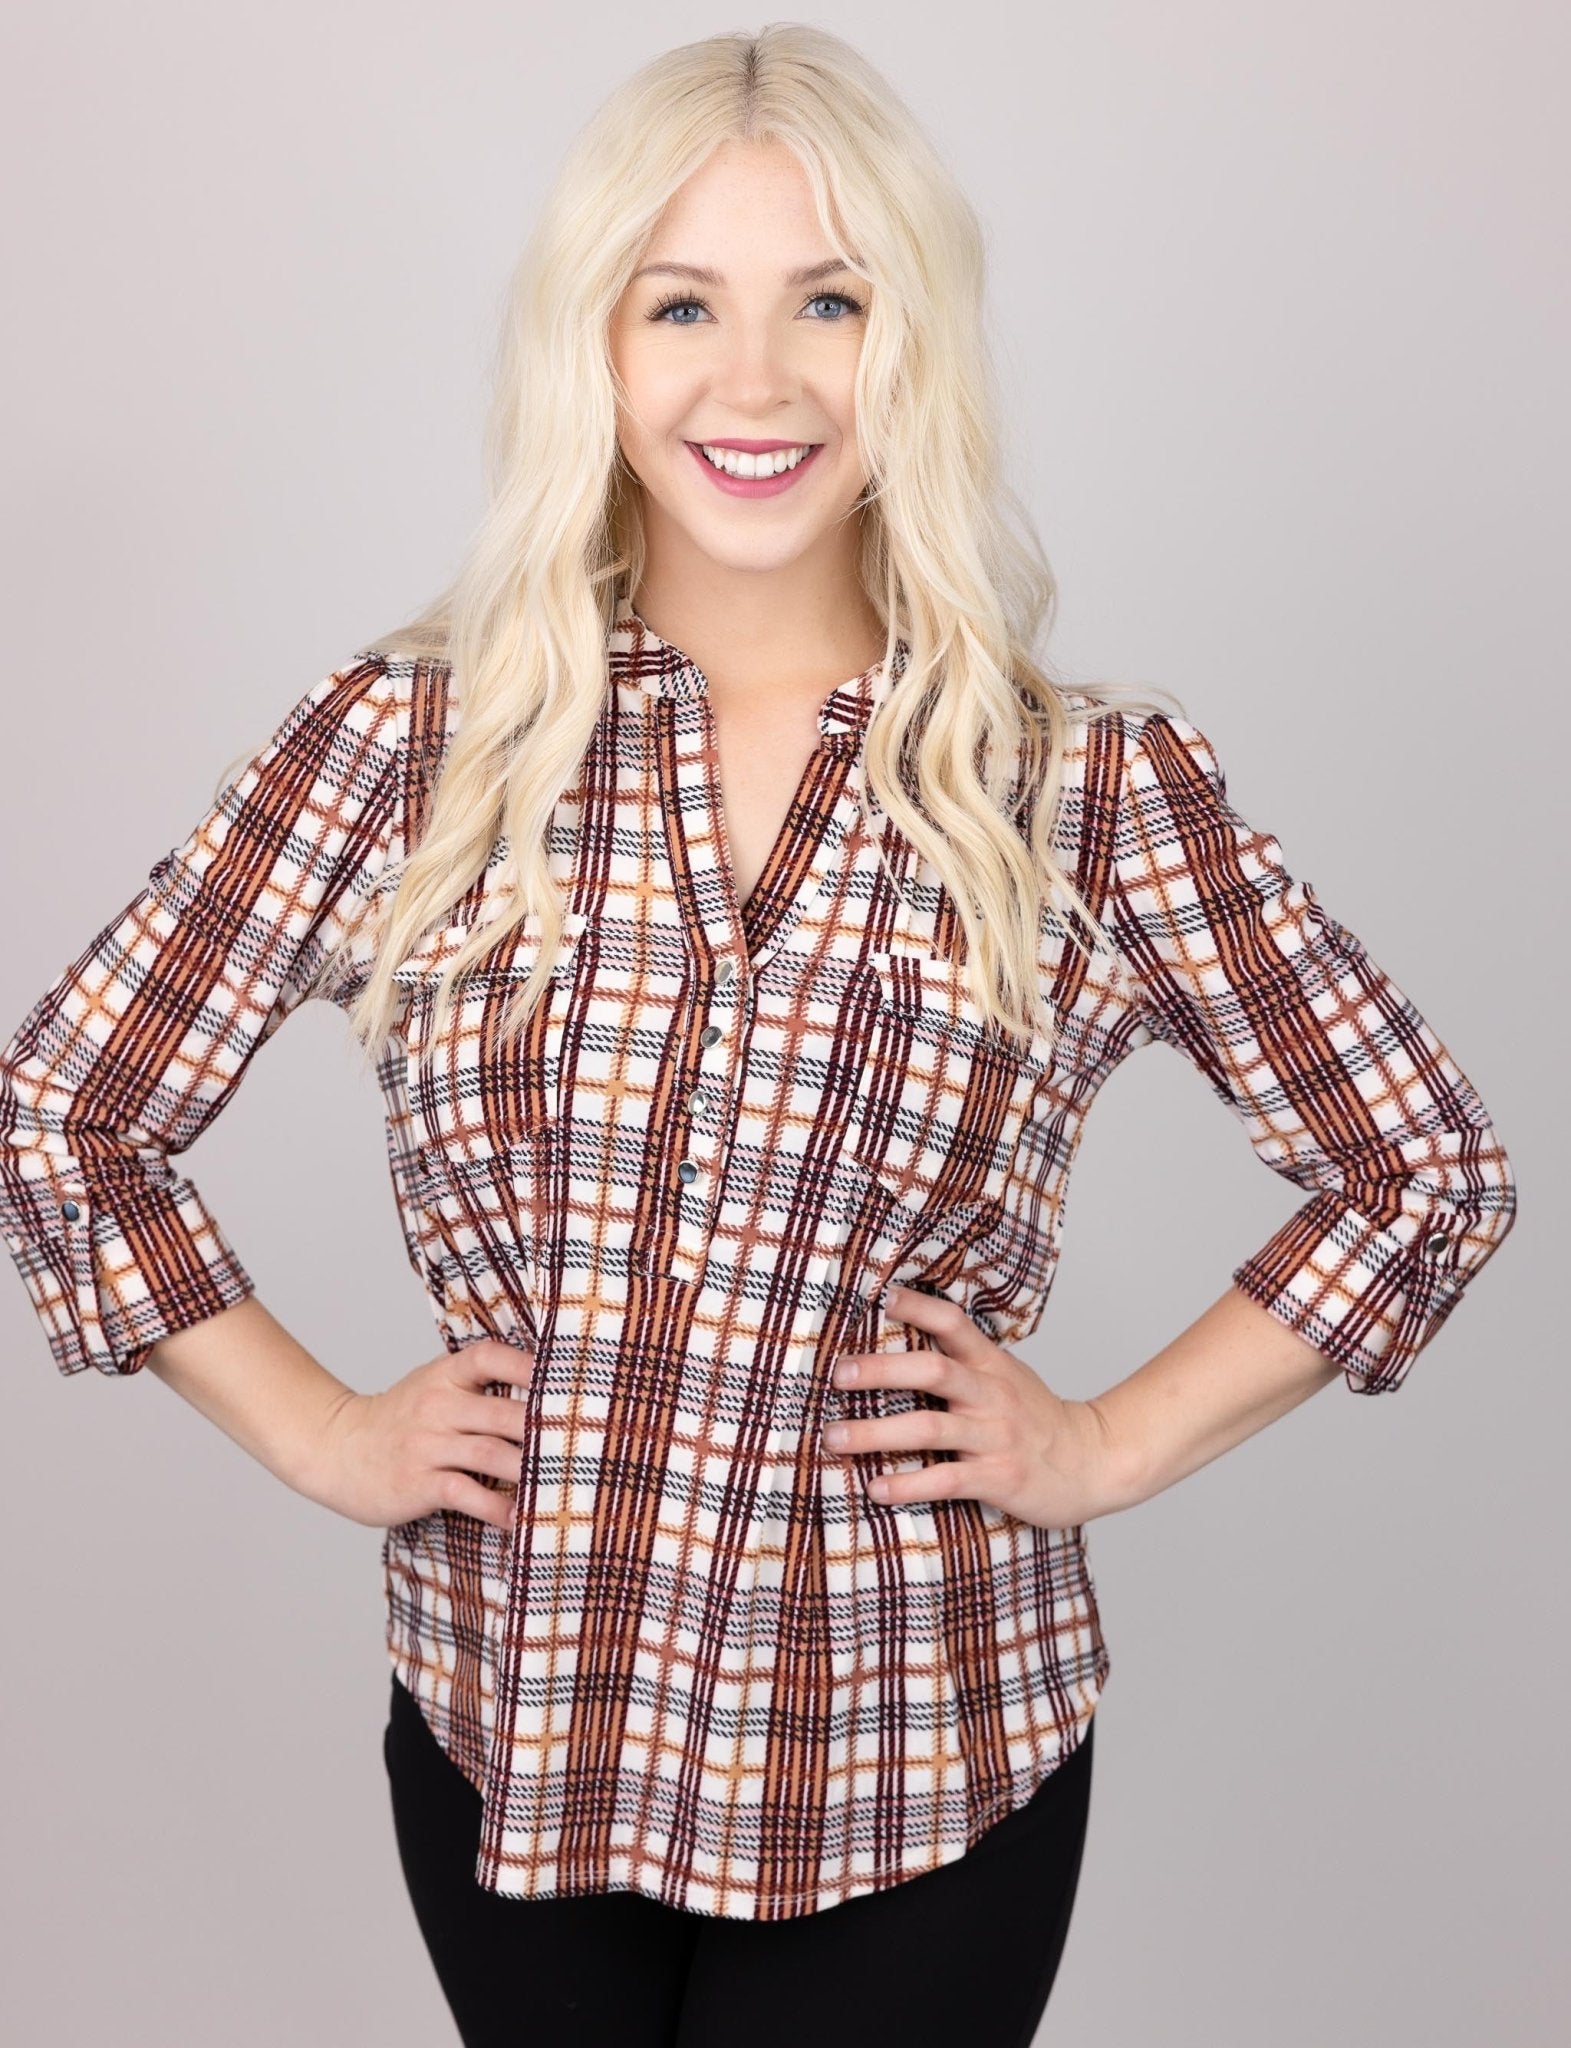 Cocomo Plaid Popover with Front Pockets - DressbarnClothing